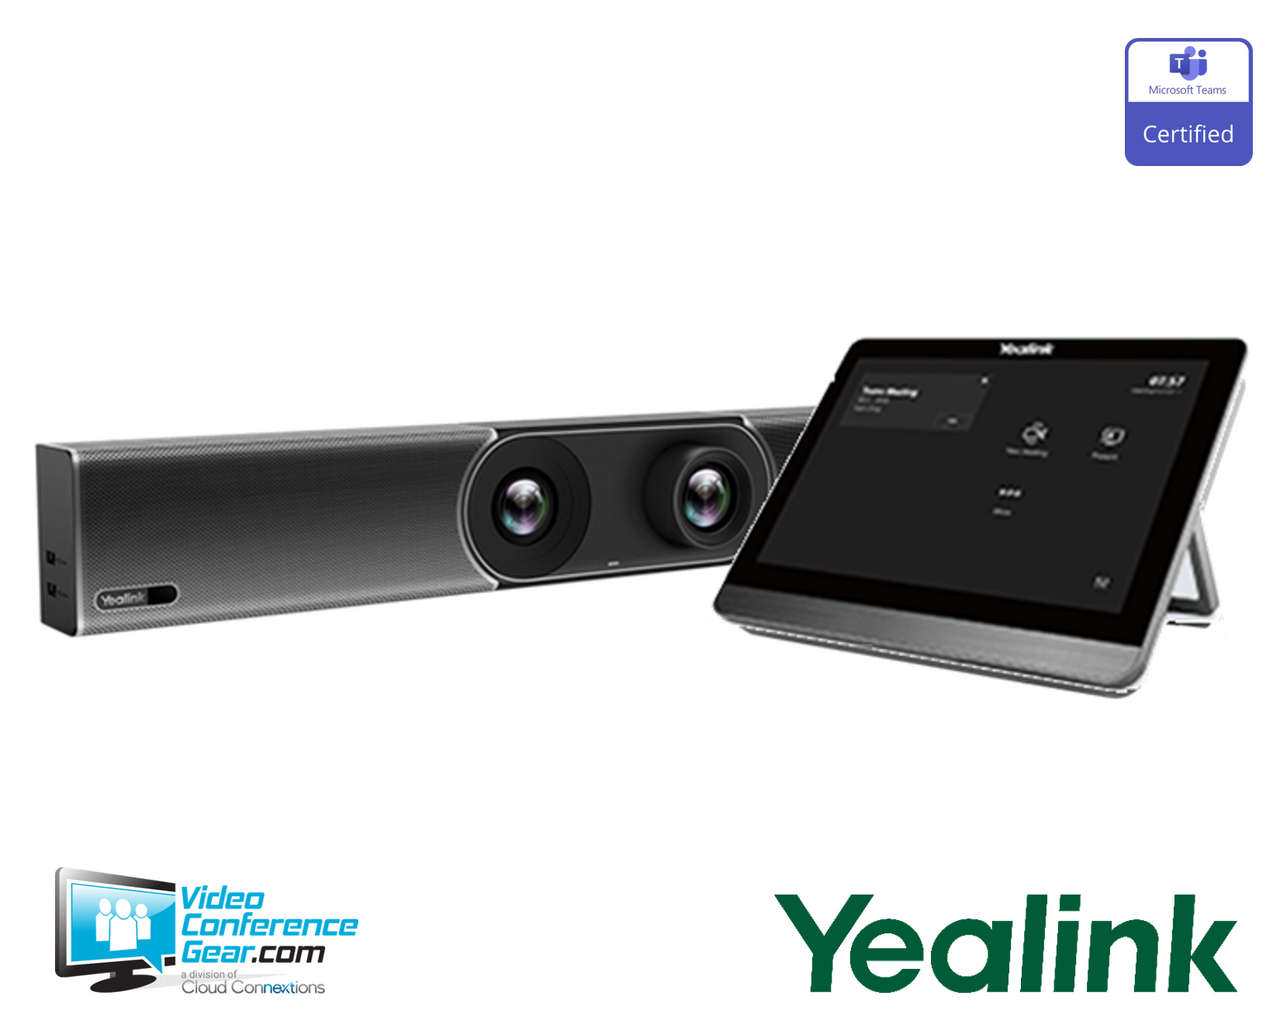 Yealink MeetingBar A30 Microsoft Teams Room Solution with All-in-One Android Collaboration Videobar and CTP18 Room Controller for Medium Rooms